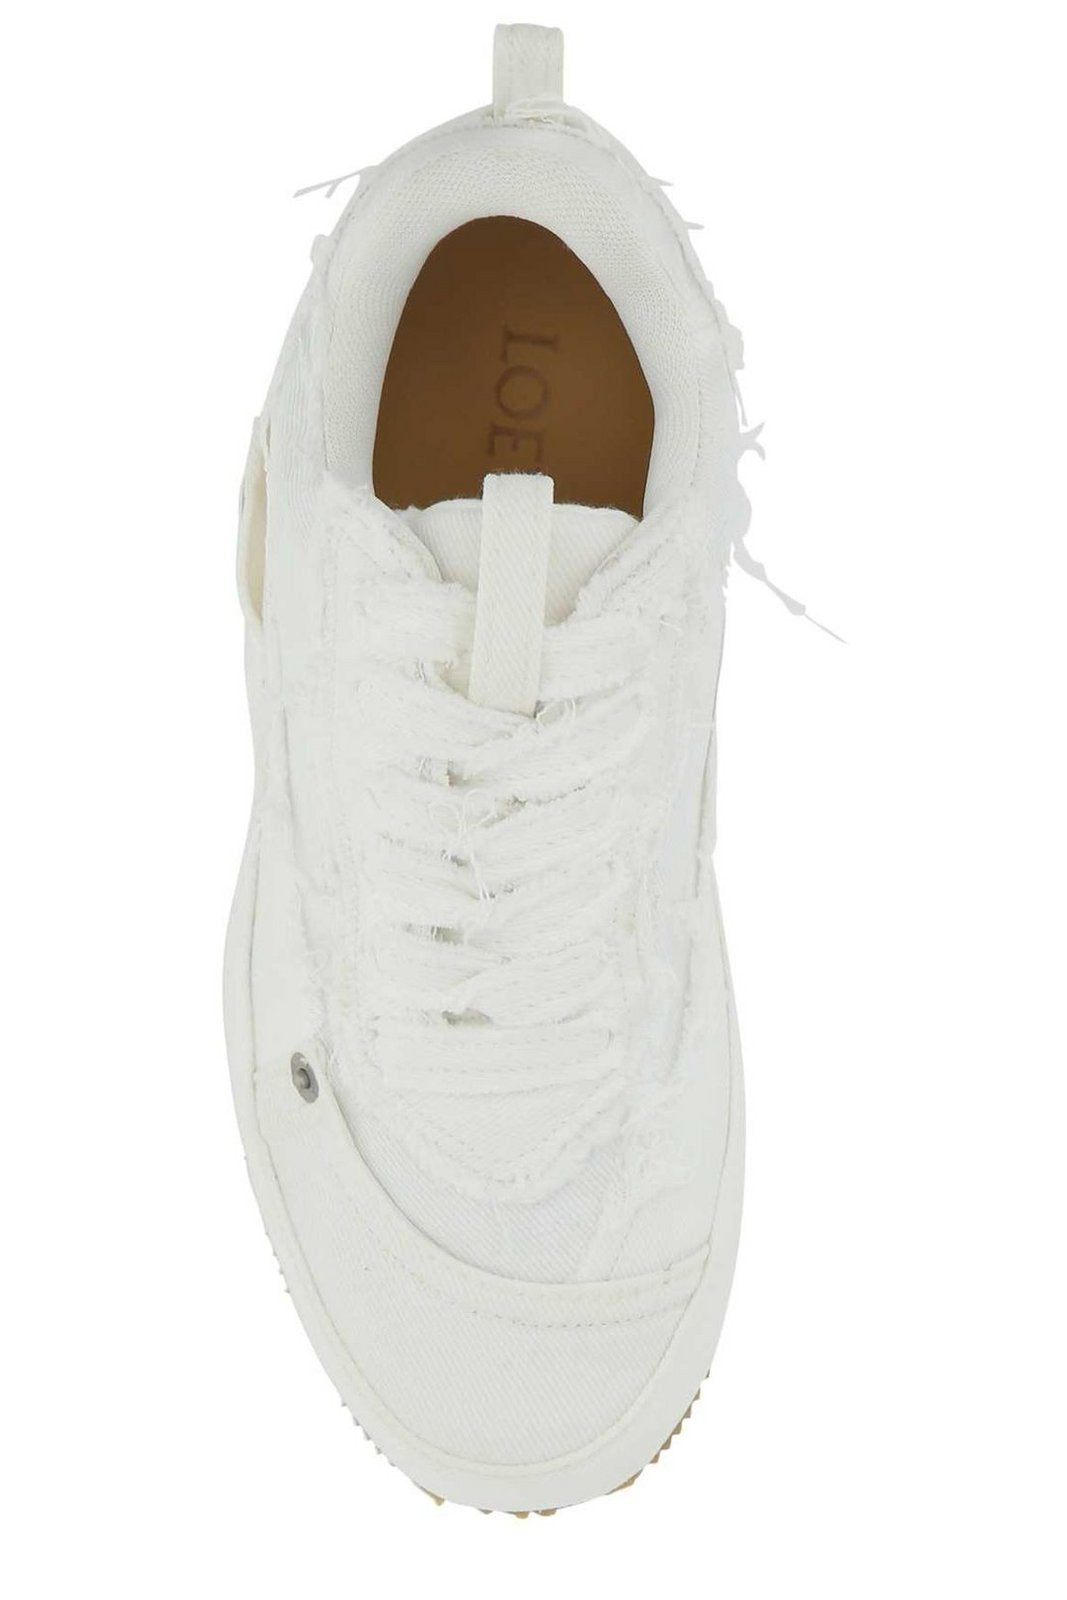 Loewe Deconstructed Lace-Up Sneakers